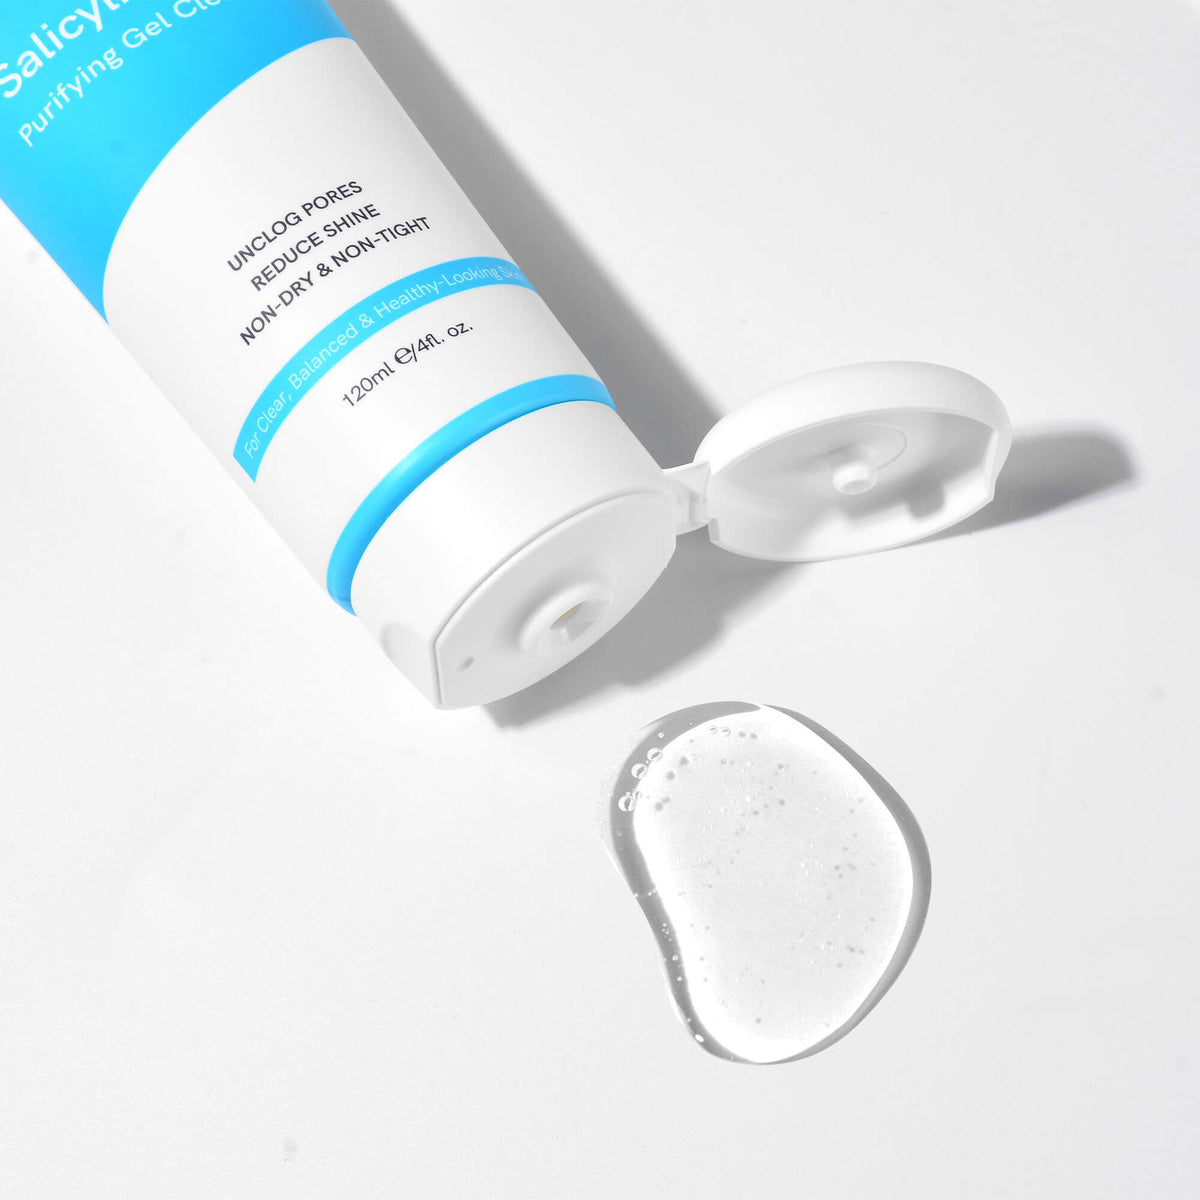 Amarrie | private label facial cleanser-salicylic acid cleanser